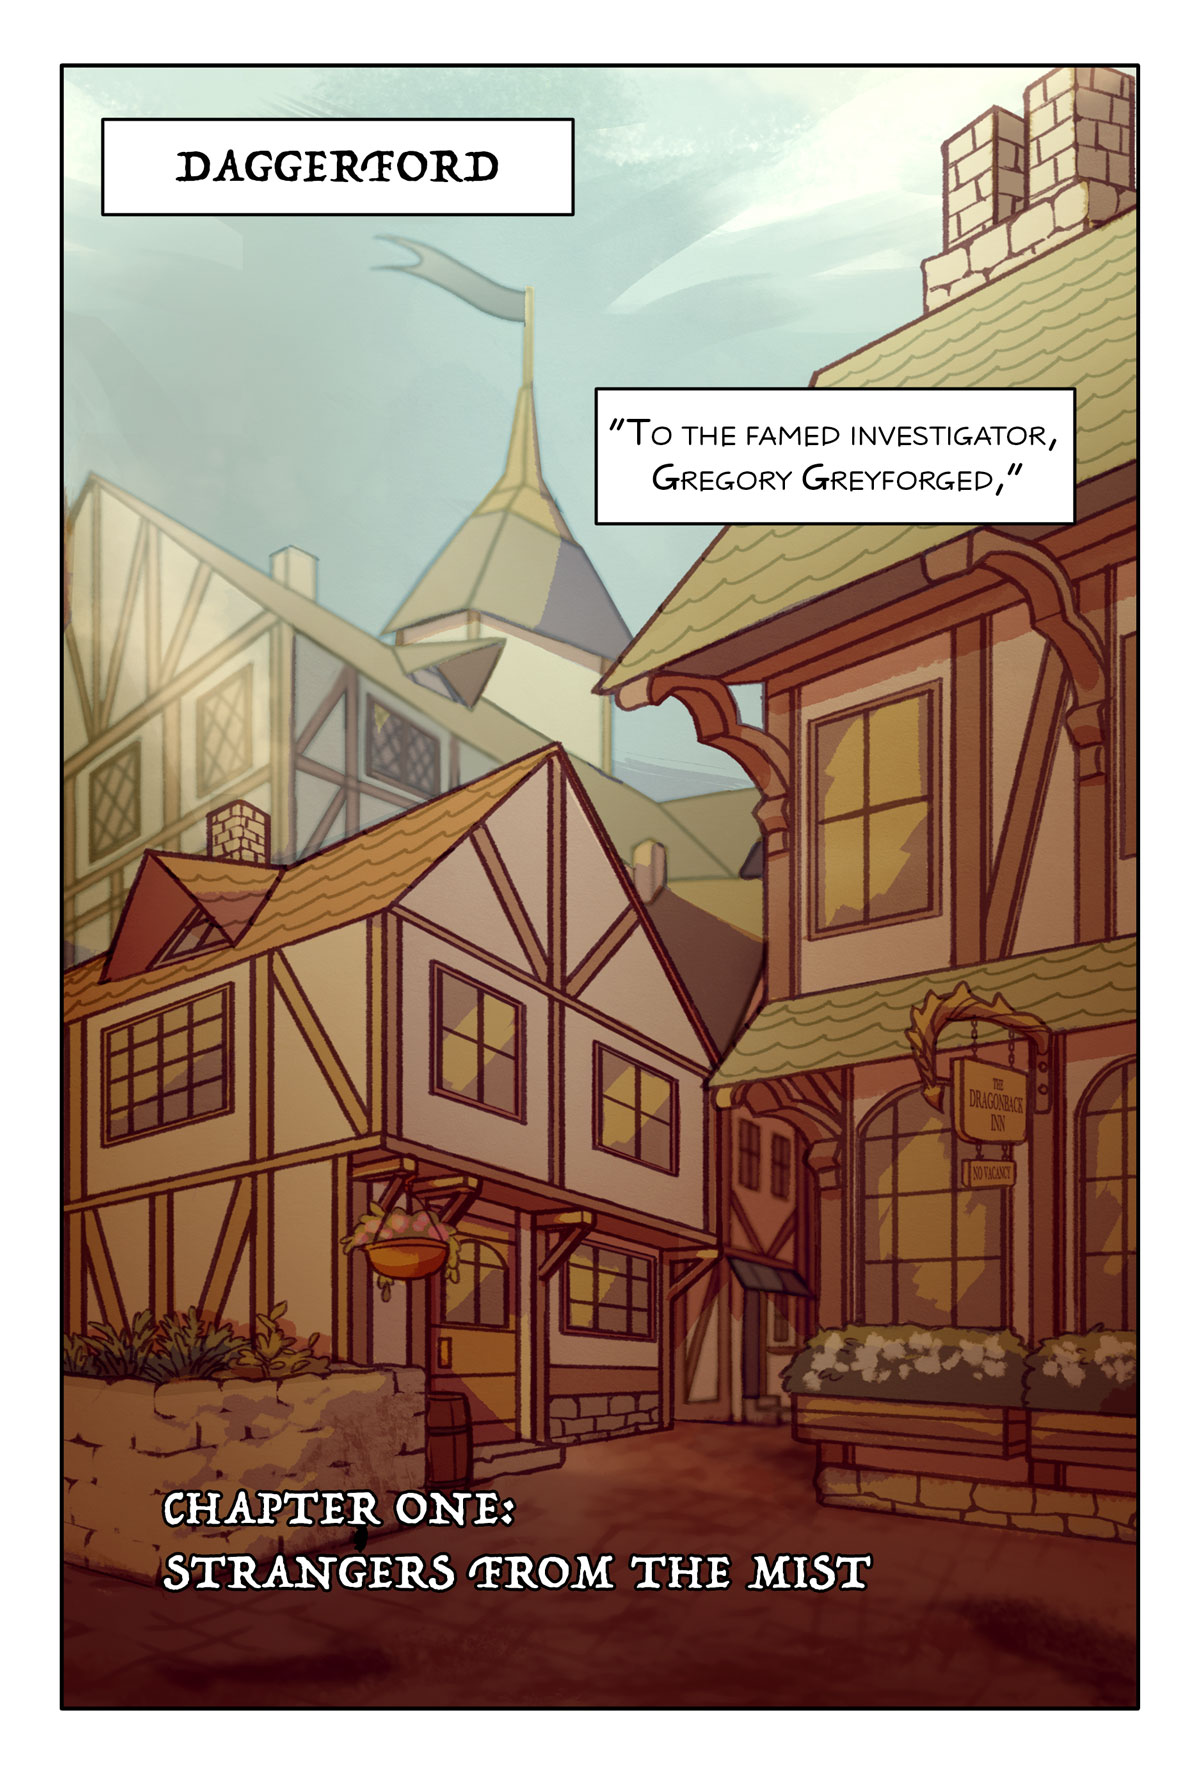 Fantasy Town, background design and comic page